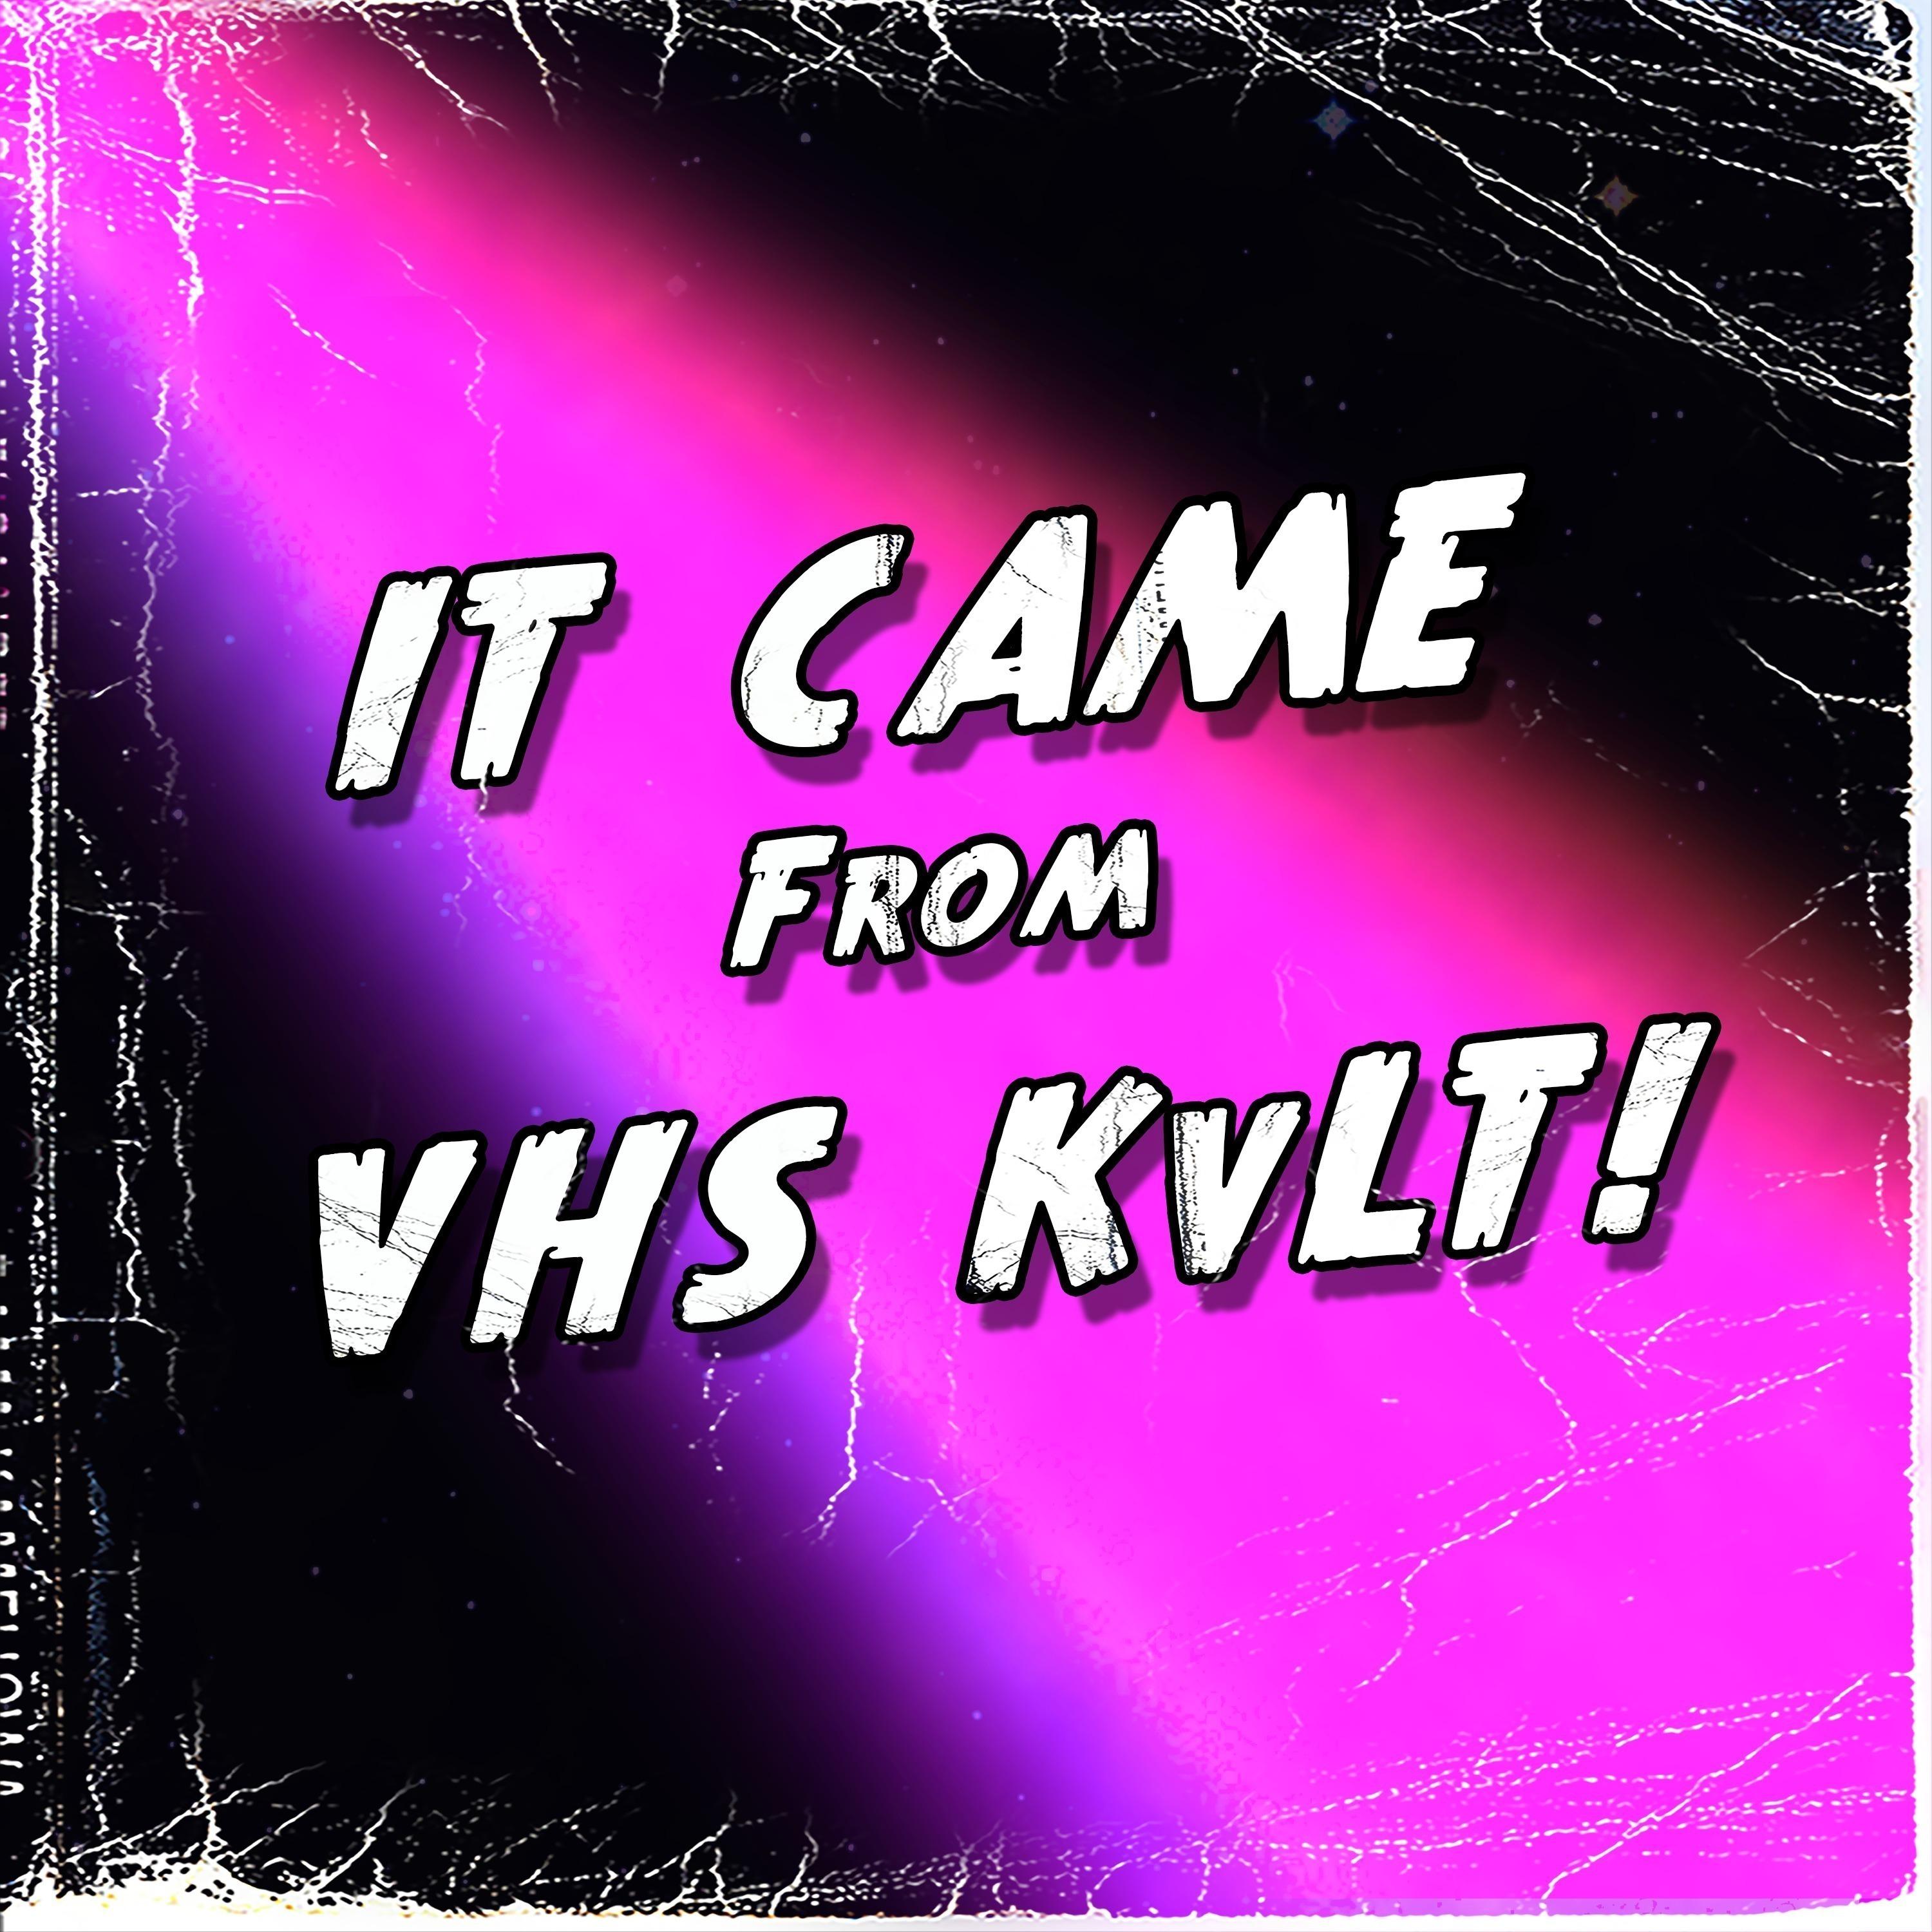 It Came from VHS KvLT